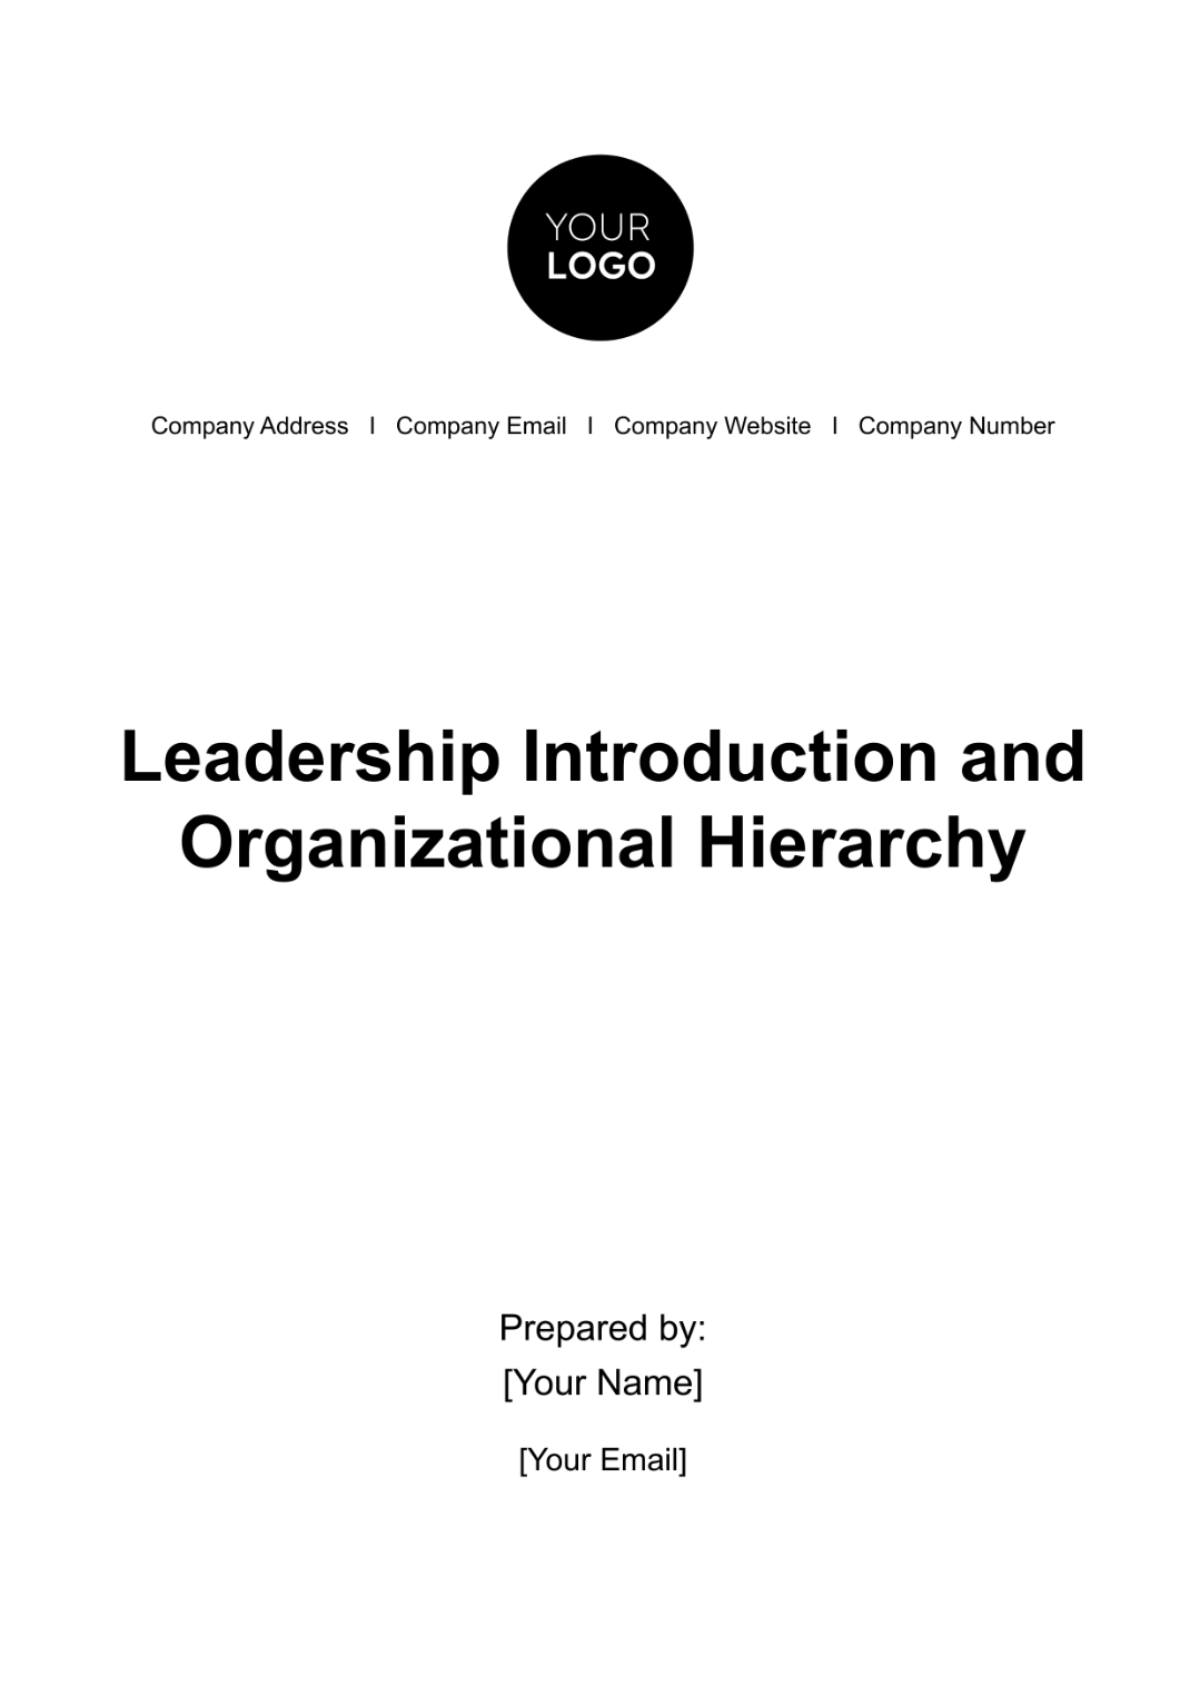 Free Leadership Introduction & Organizational Hierarchy HR Template